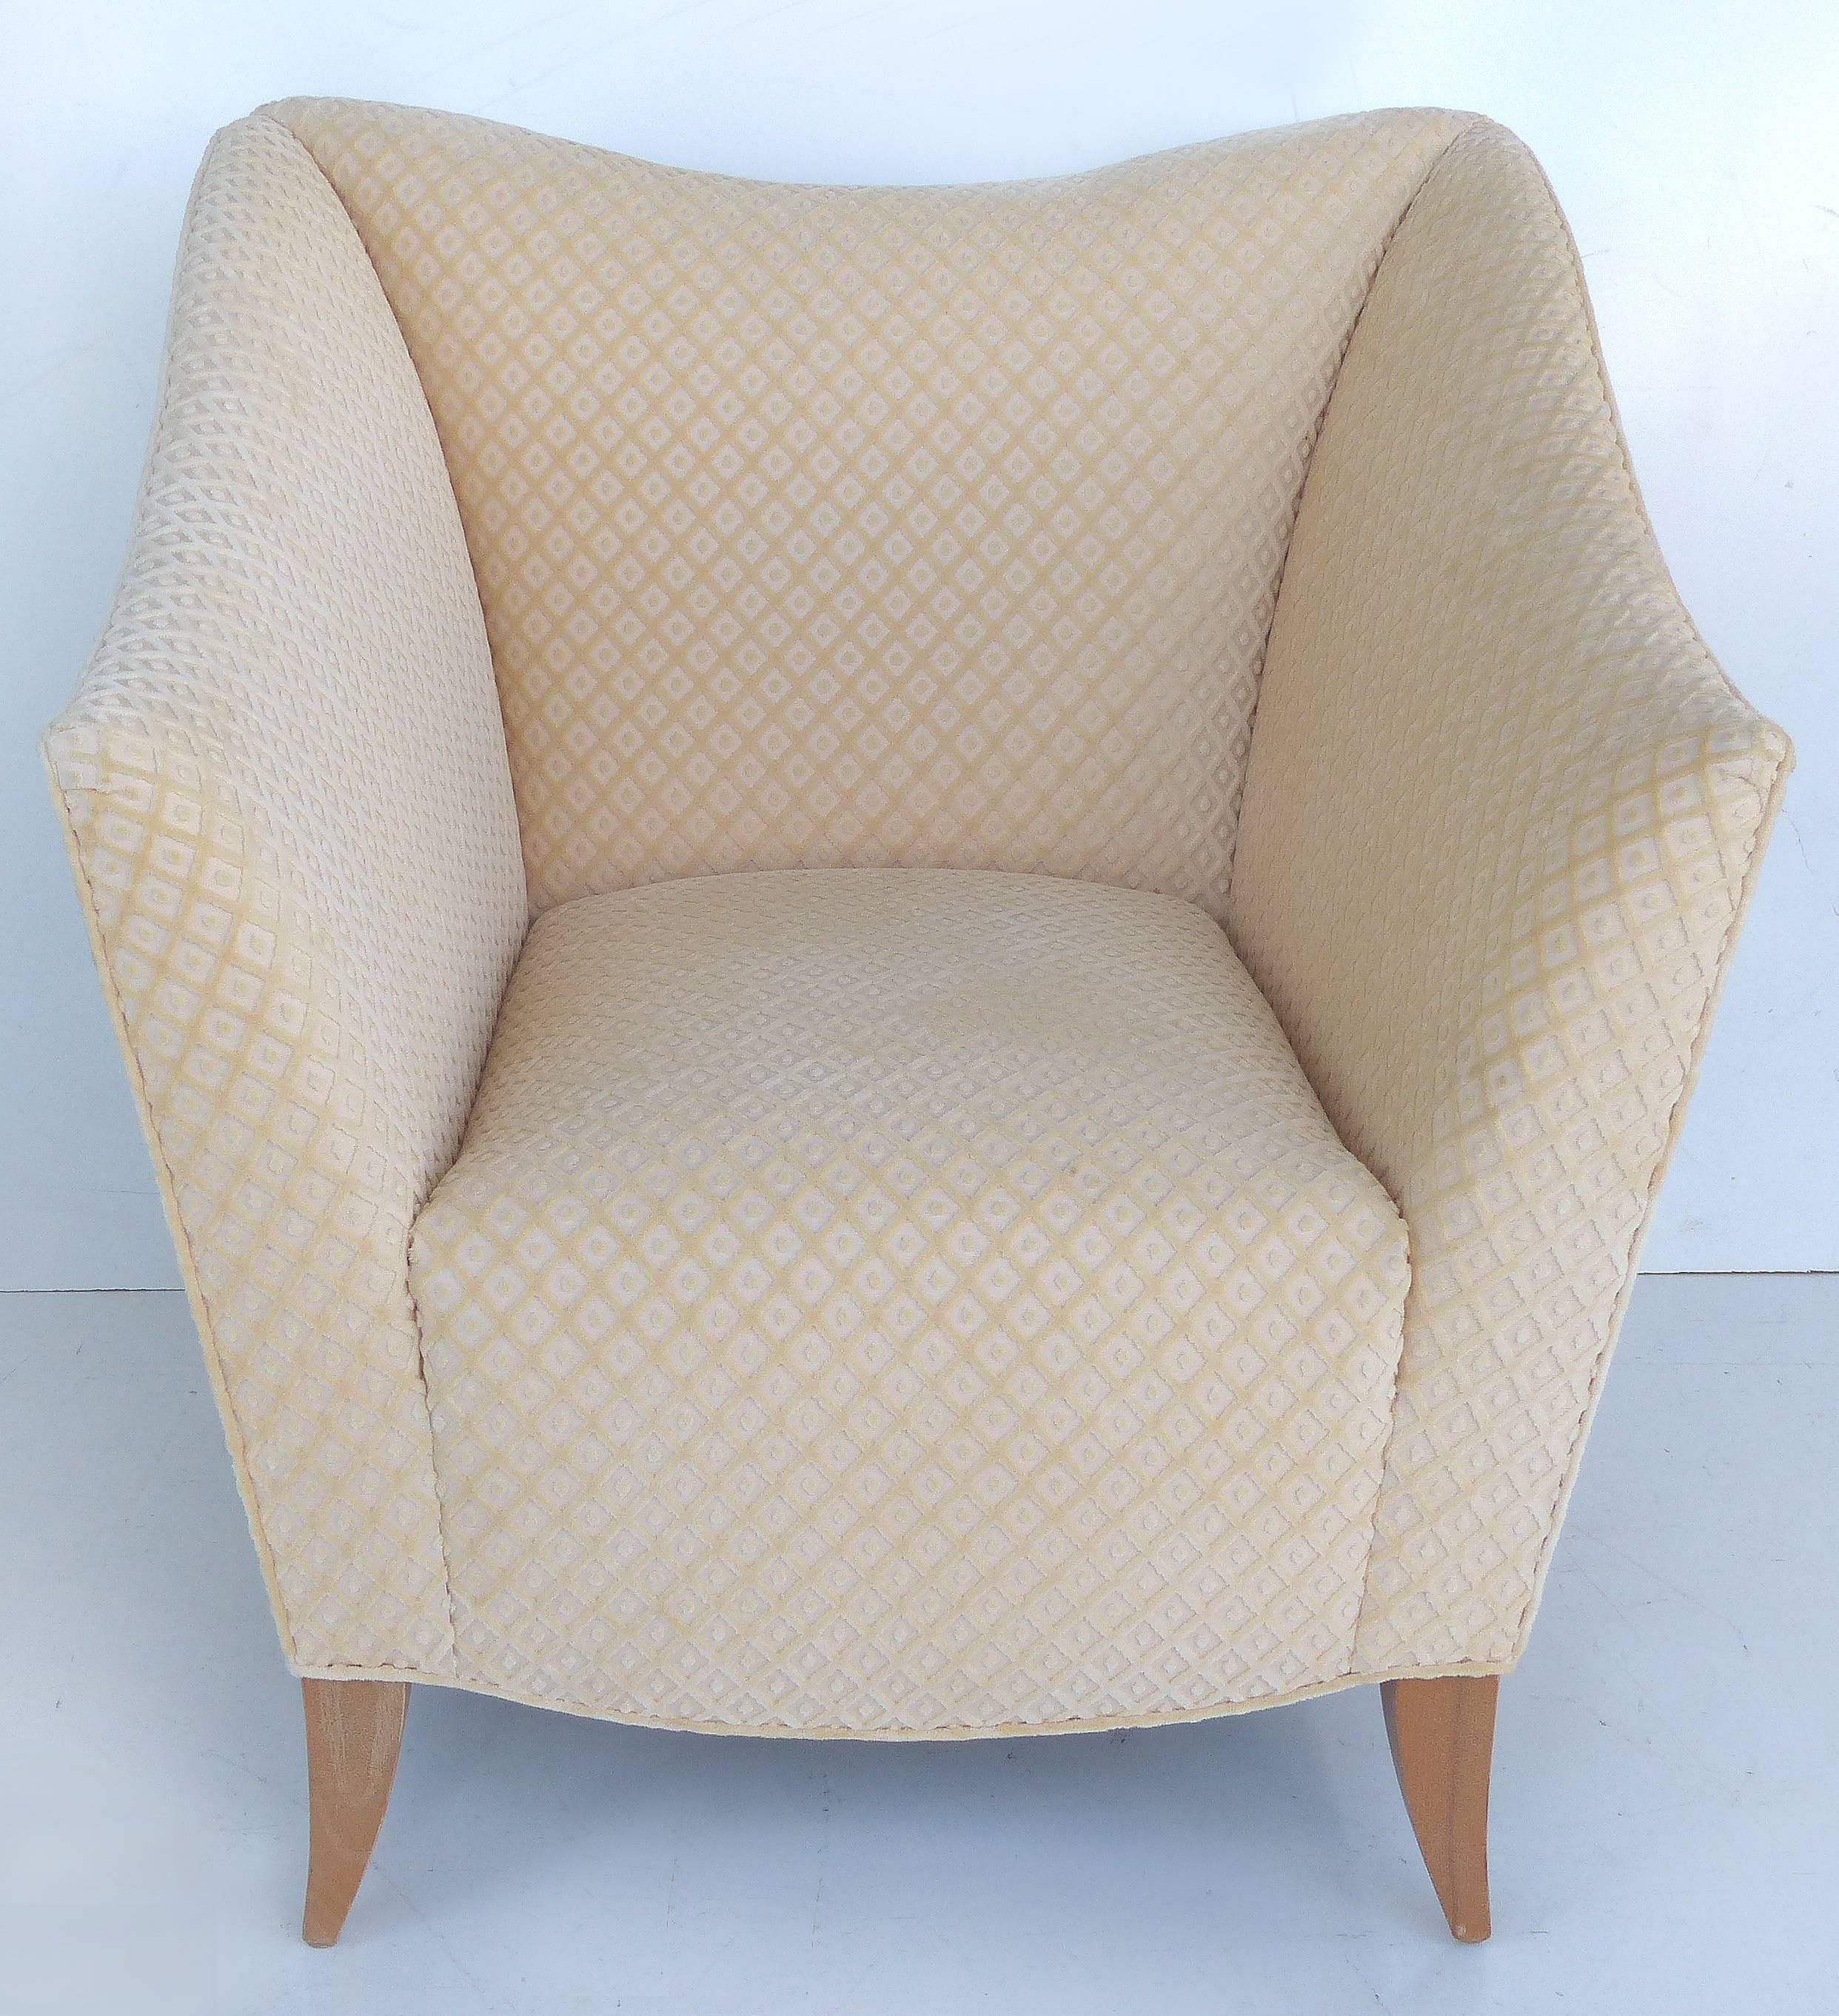 Sculptural Upholstered Club Chairs by Swaim, Pair

Offered for sale is a pair of plush, upholstered, sculptural club chairs by Swaim. The upholstery is a cut velvet in an ivory color with peach undertones. The splayed legs are tapering and in a